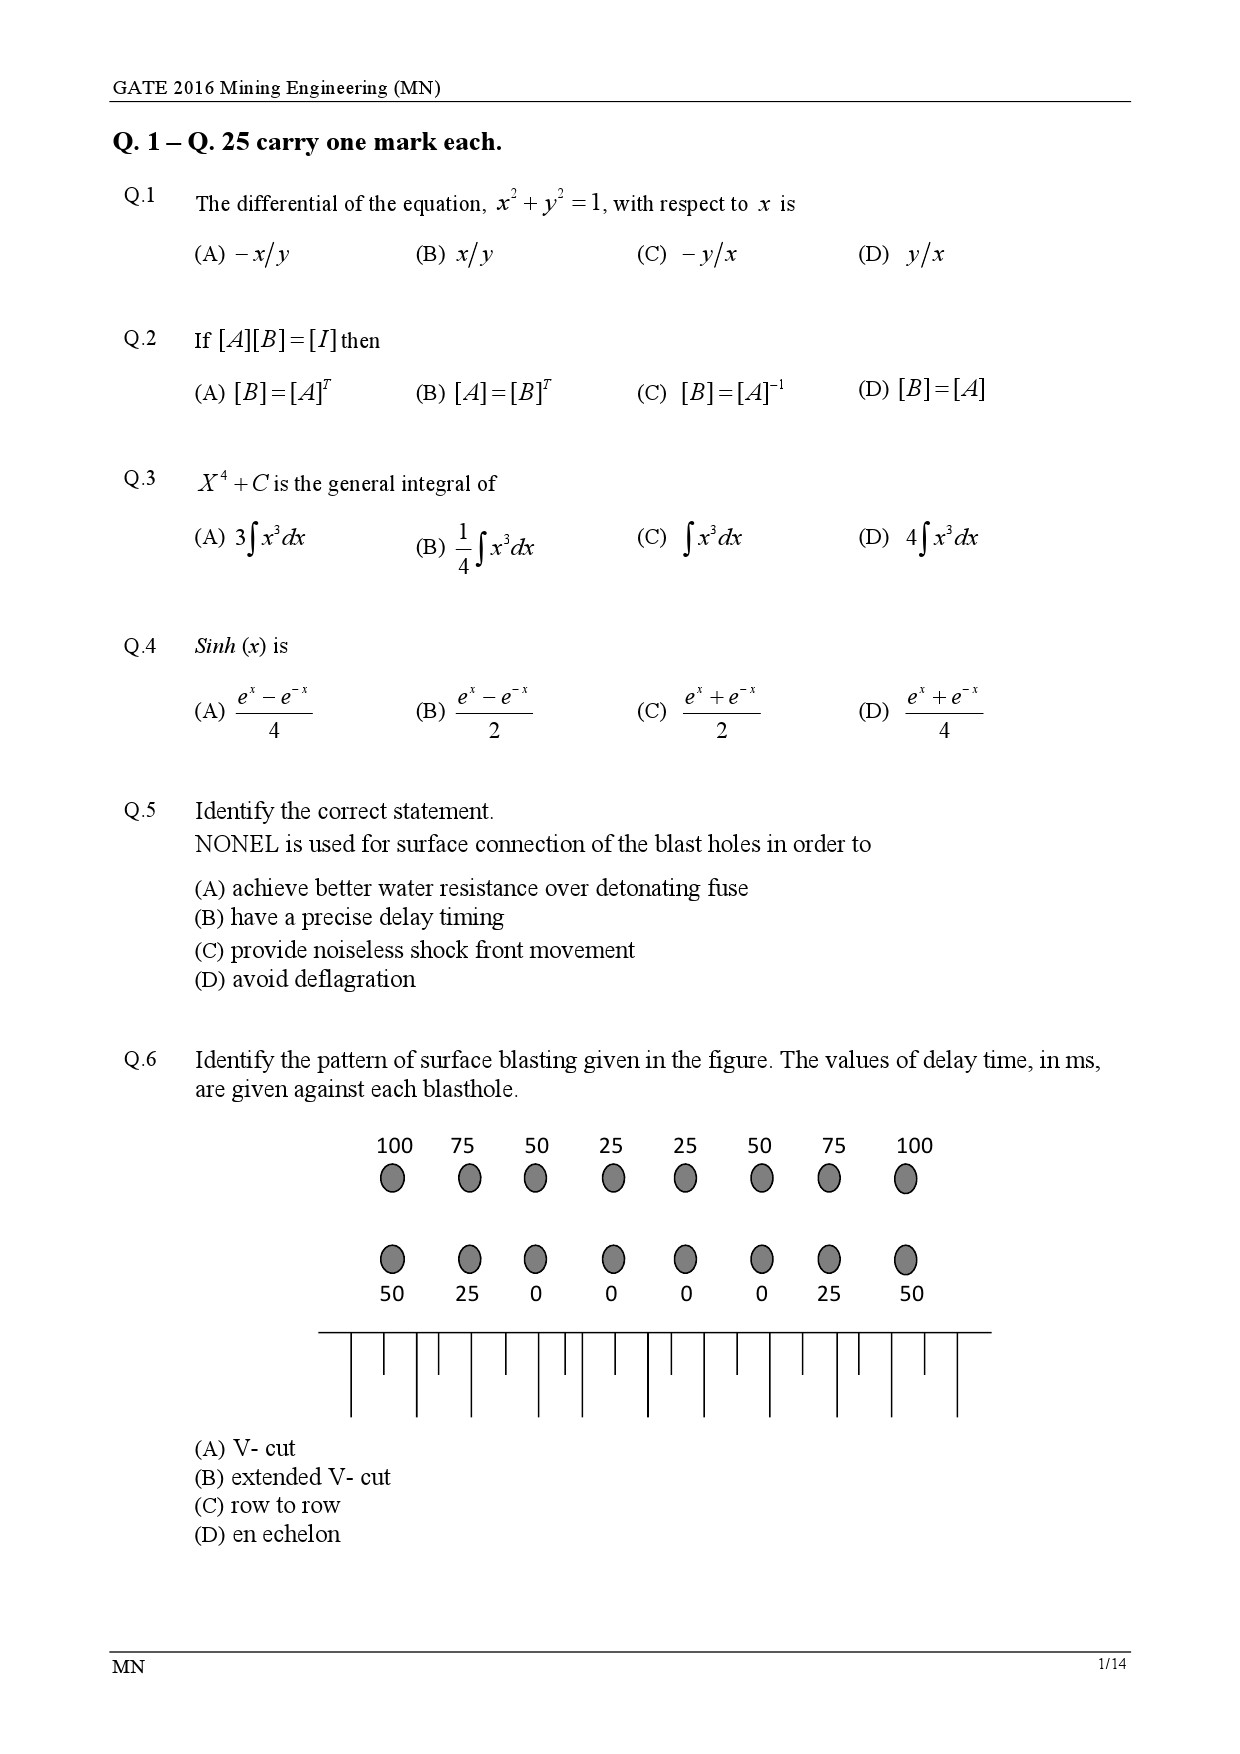 GATE Exam Question Paper 2016 Mining Engineering 4